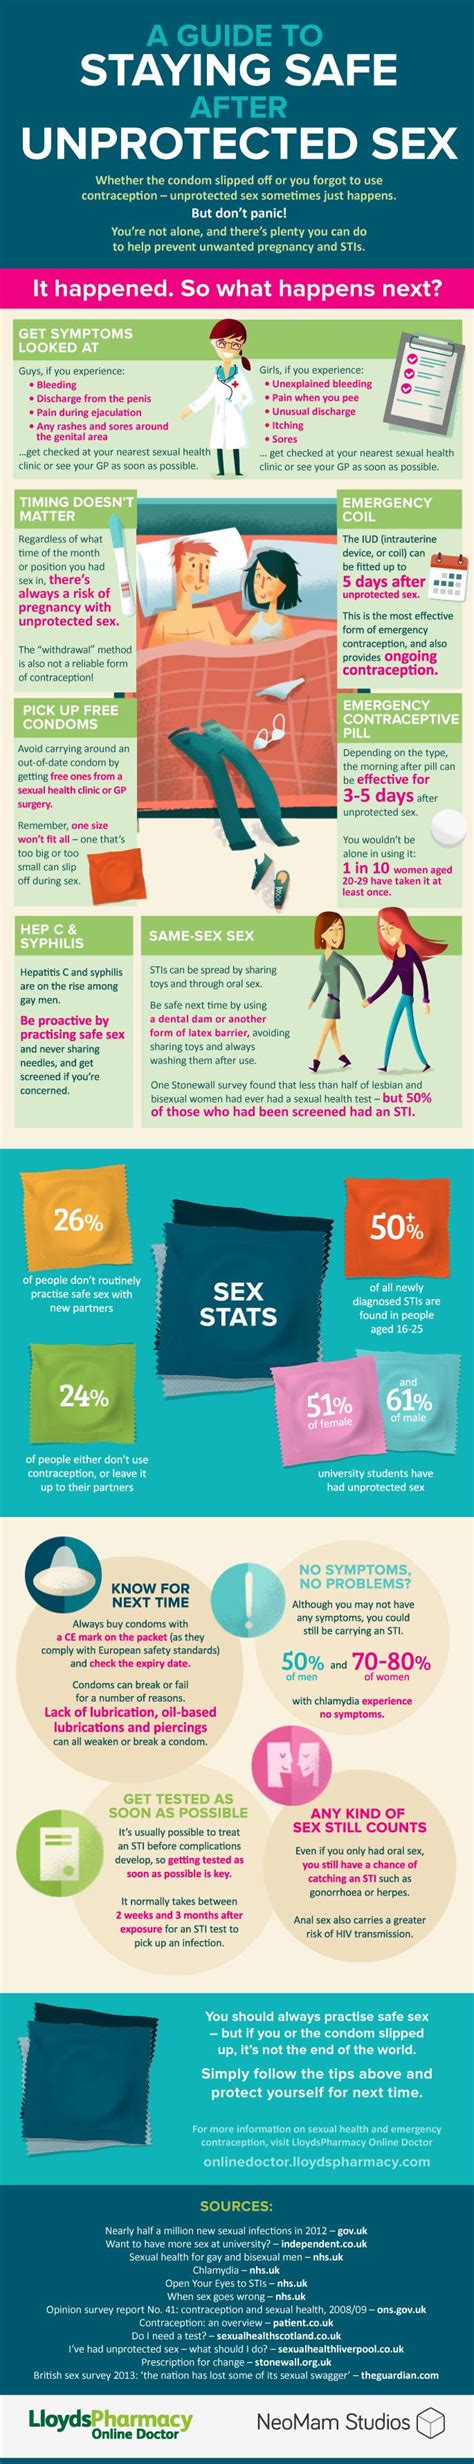 A Guide To Staying Safe After Unprotected Sex Infographic Visualistan